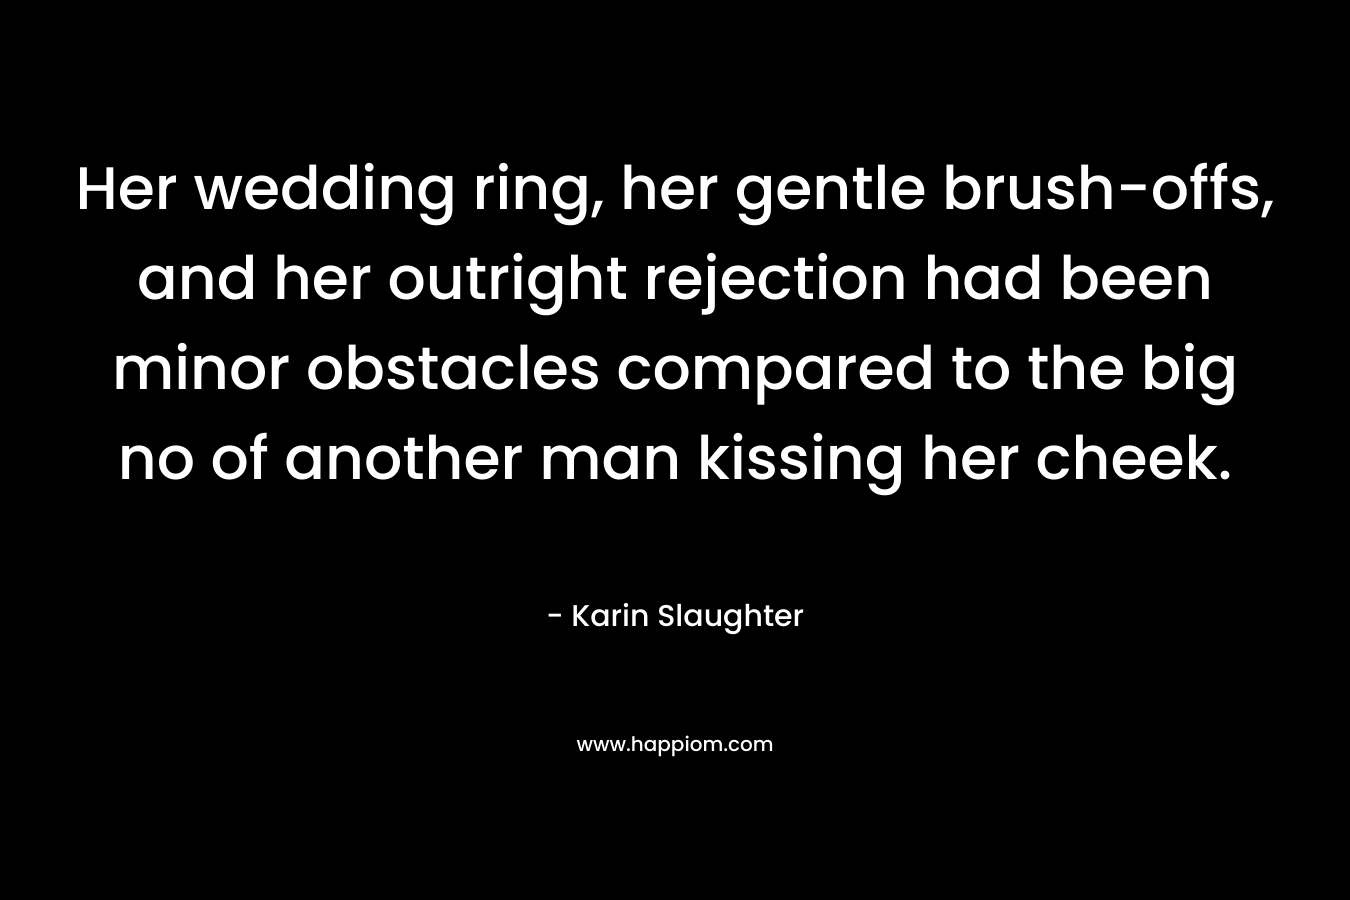 Her wedding ring, her gentle brush-offs, and her outright rejection had been minor obstacles compared to the big no of another man kissing her cheek. – Karin Slaughter